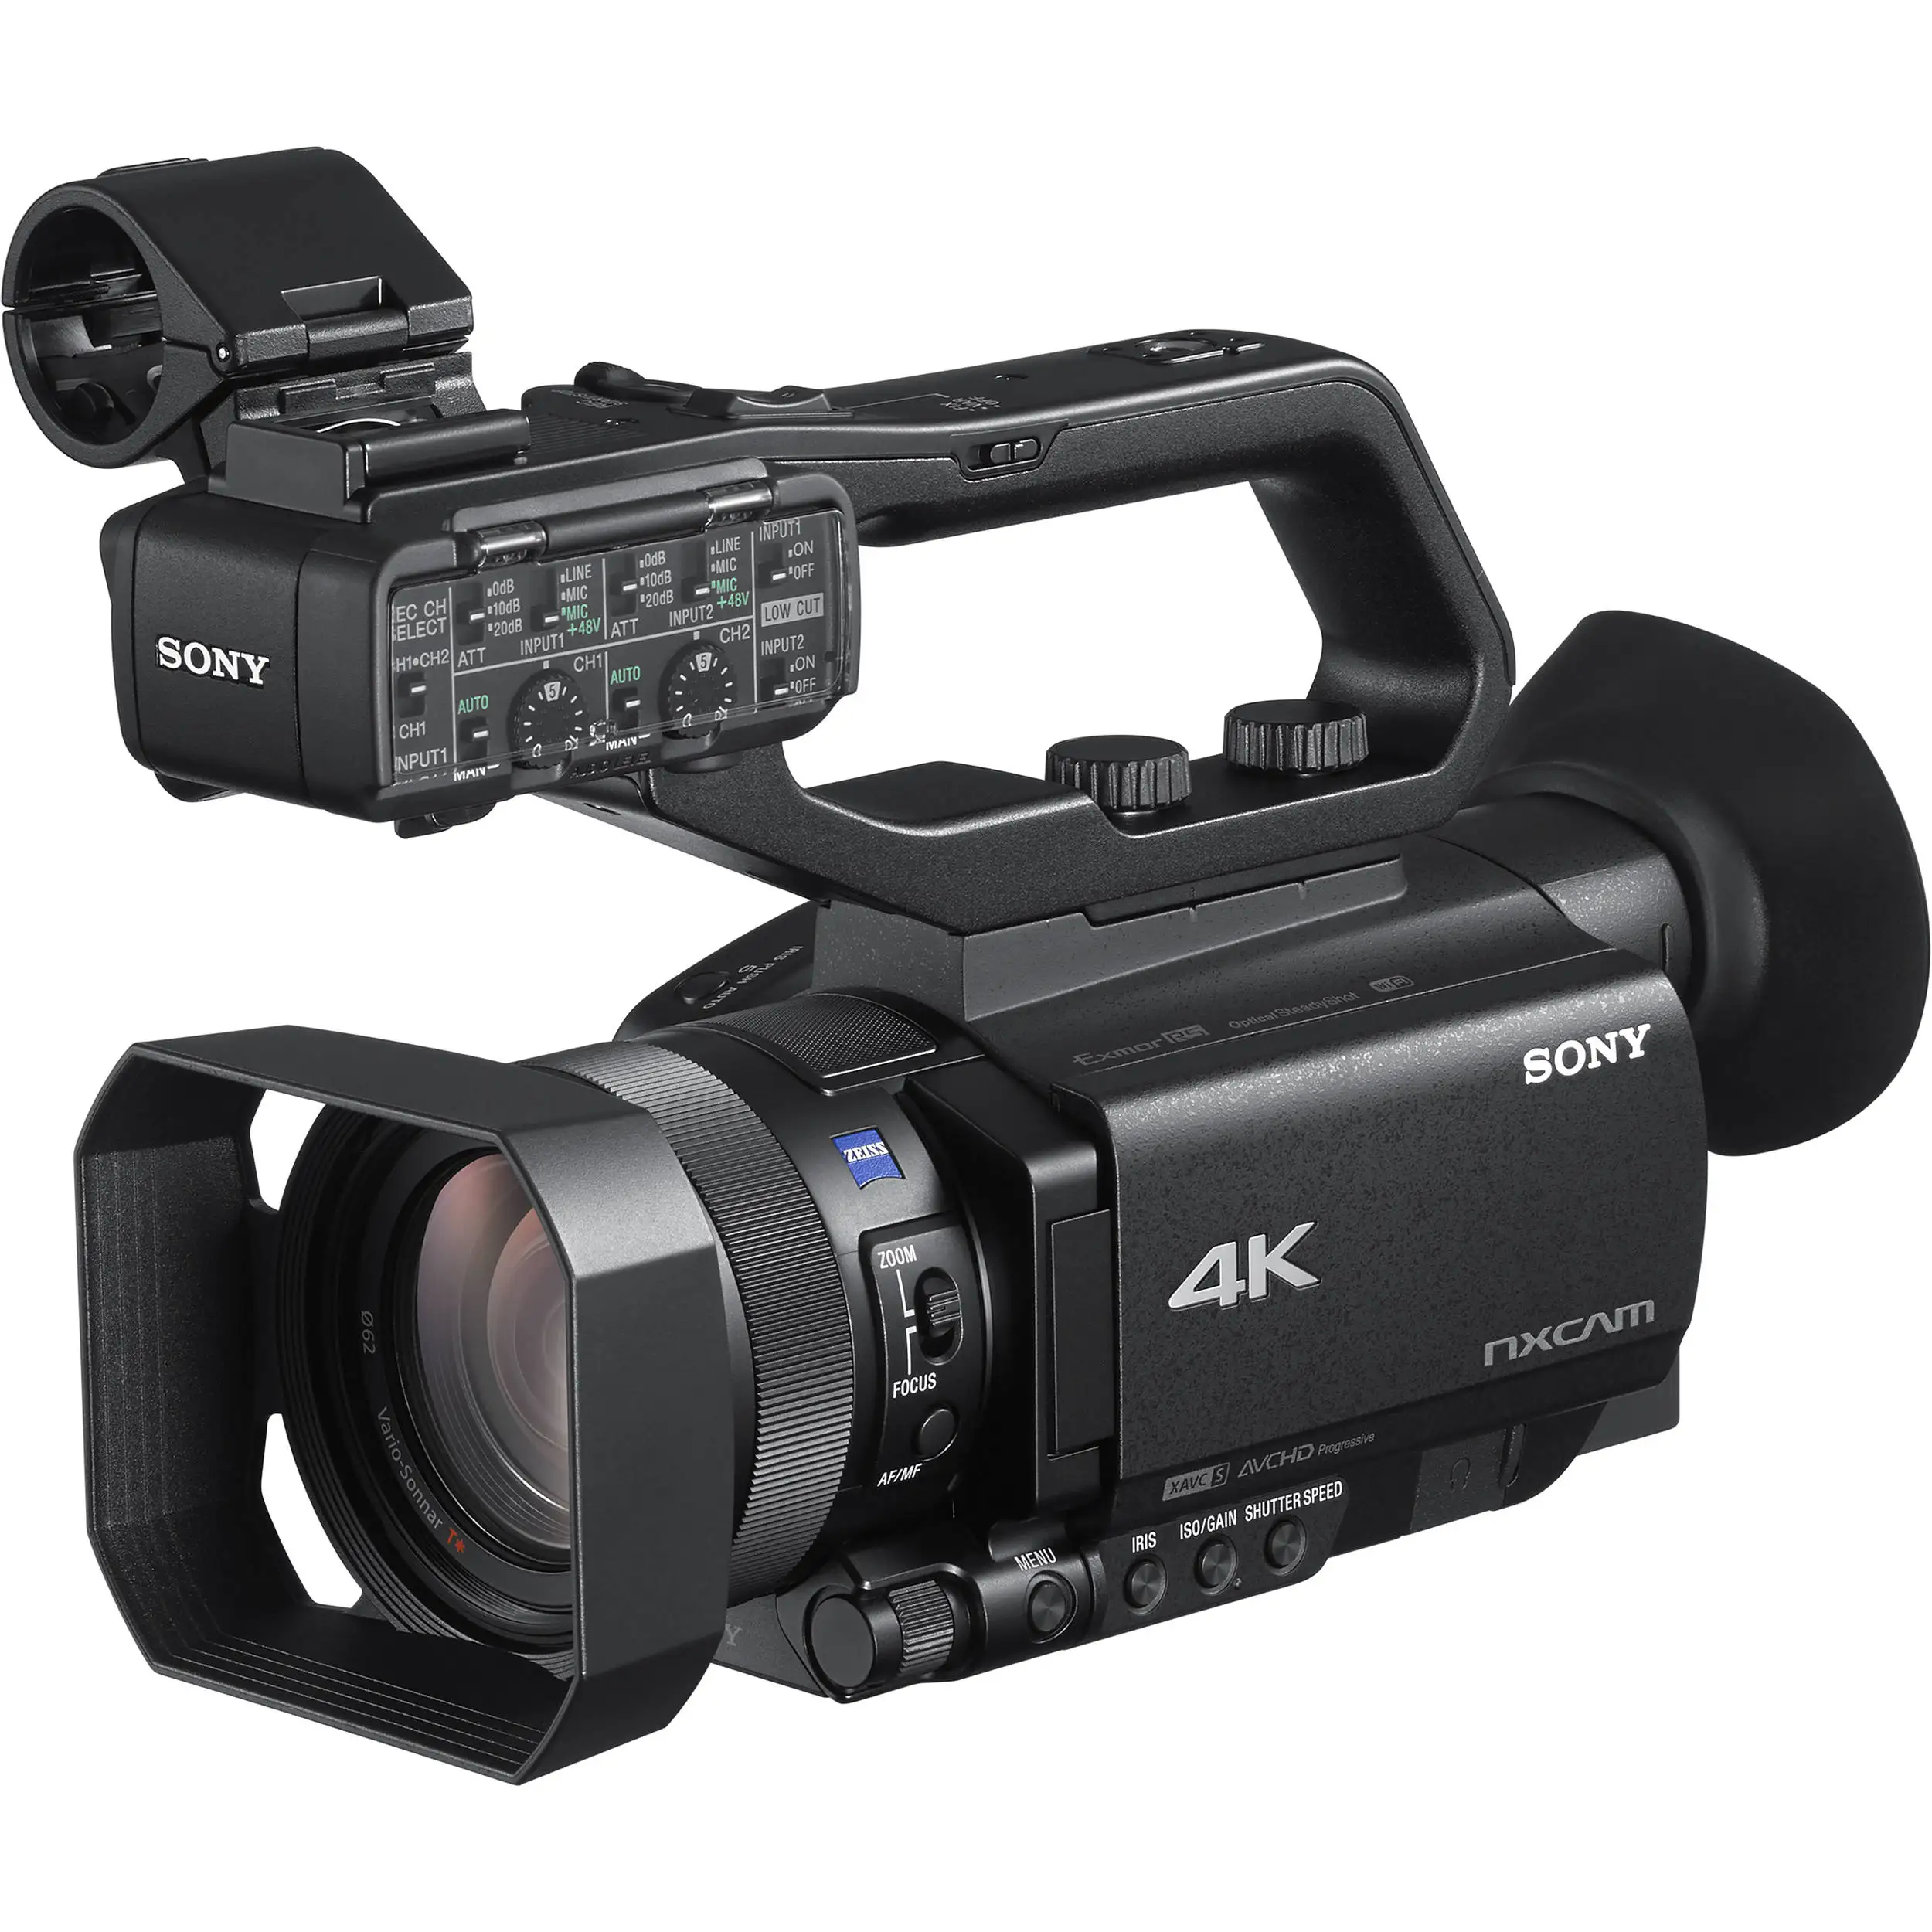 

SUMMER SALES DISCOUNT ON 100% ORIGINAL AUTHENTIC HXR-NX100 Full HD NXCAM Camcorder